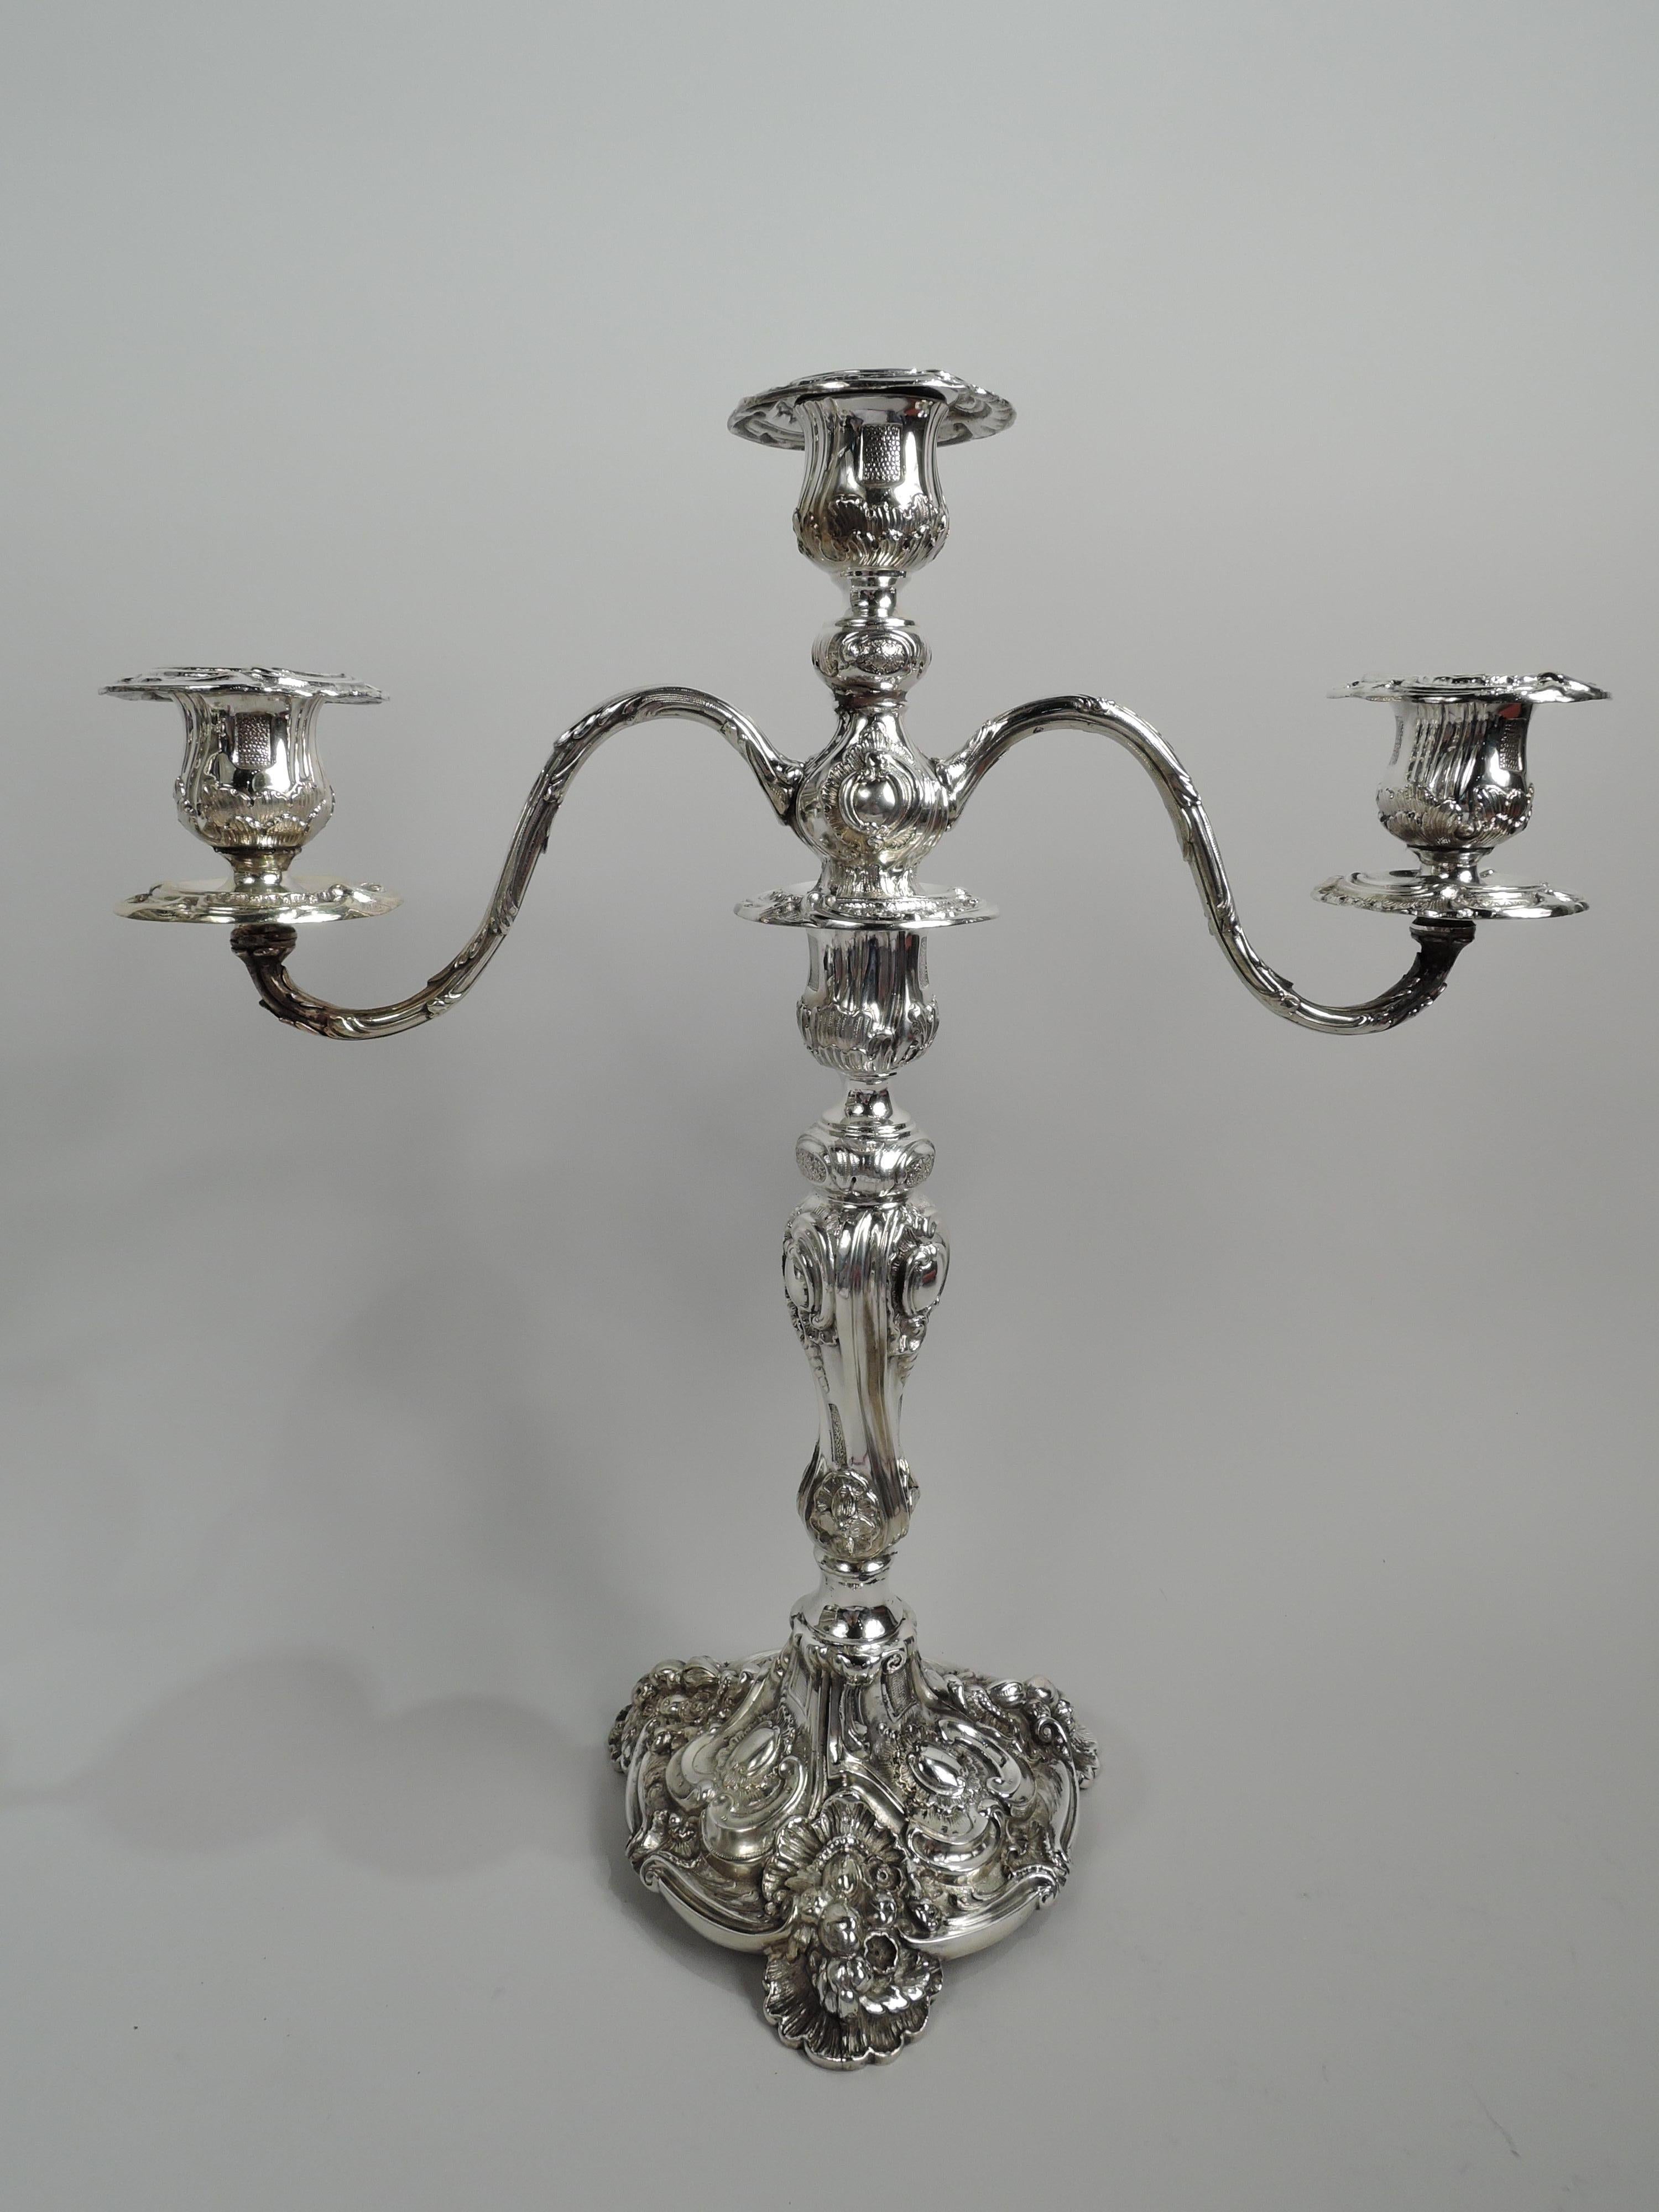 American Pair of Antique Rococo Revival Sterling Silver 3-Light Candelabra